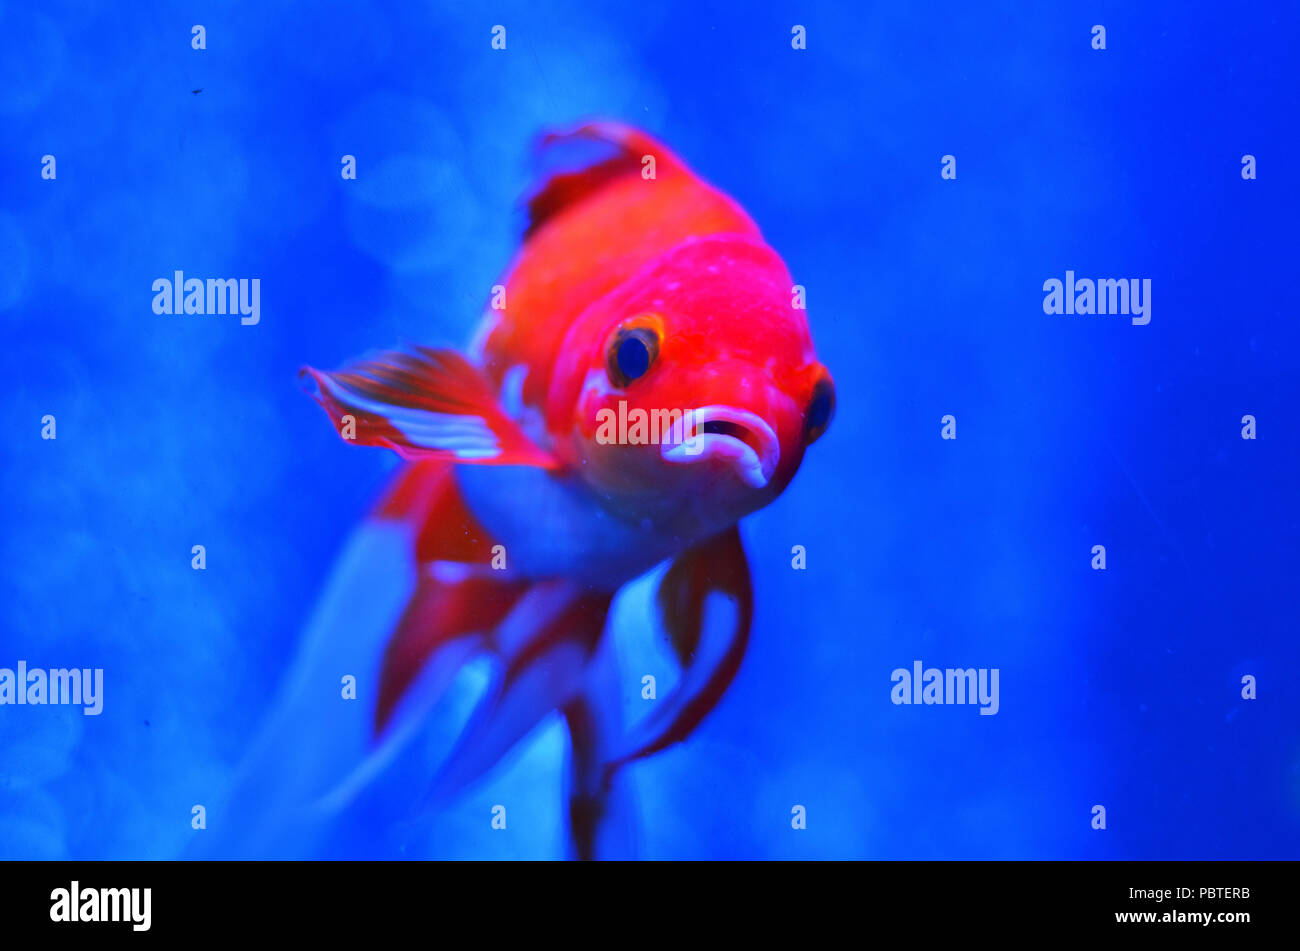 Red and white fish with an open mouth in pure blue water close-up Stock Photo